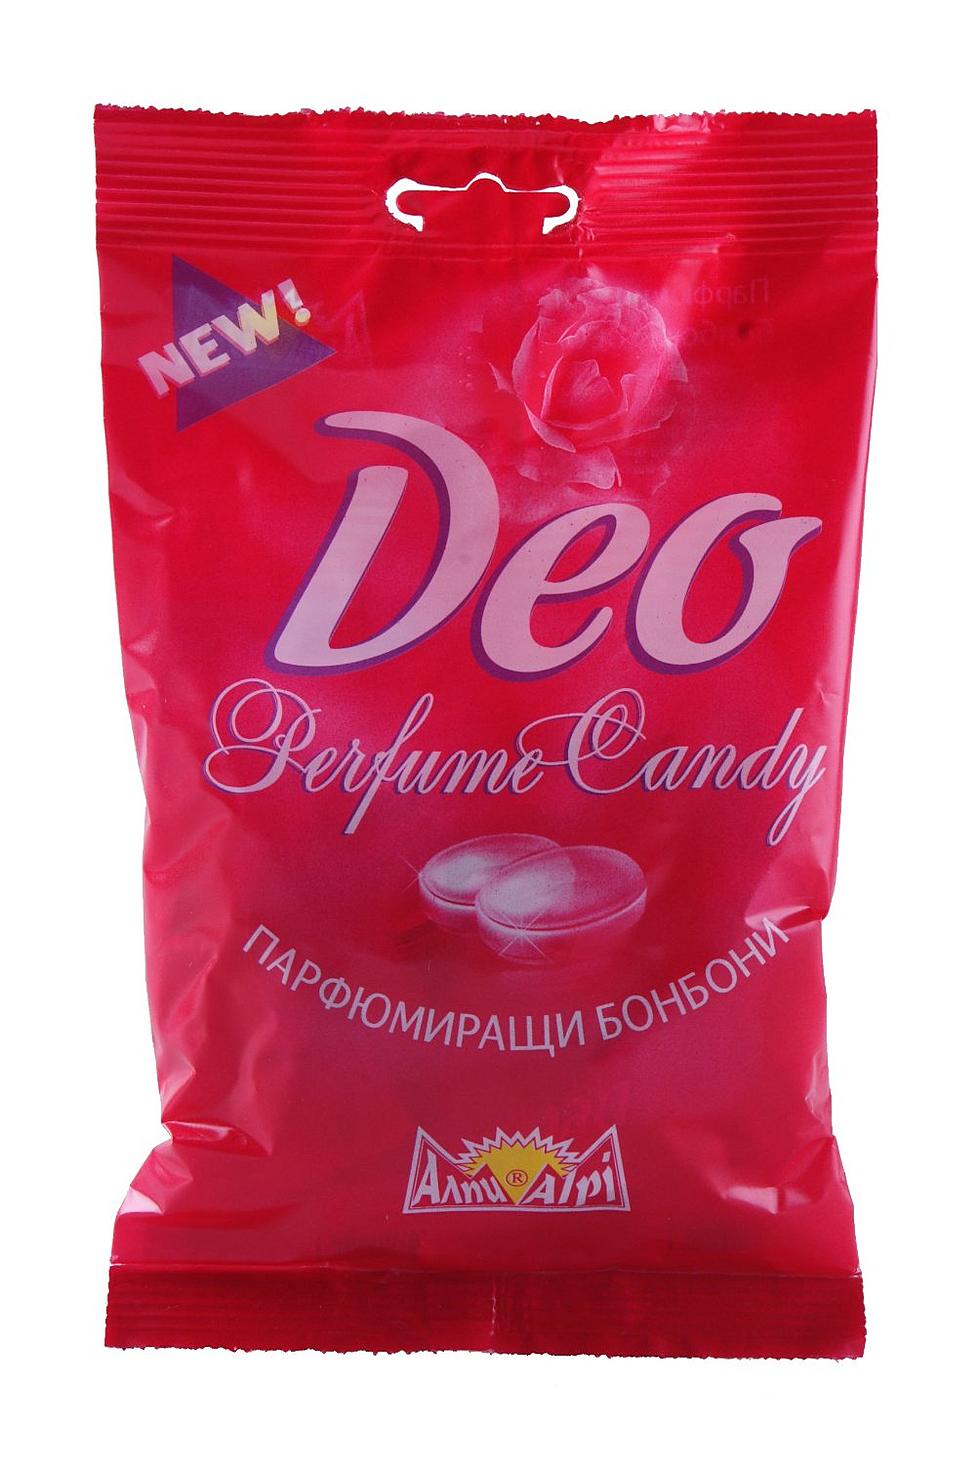 Instead of Using Deodorant, You Can Eat Candy That Covers Up Your Body Odor